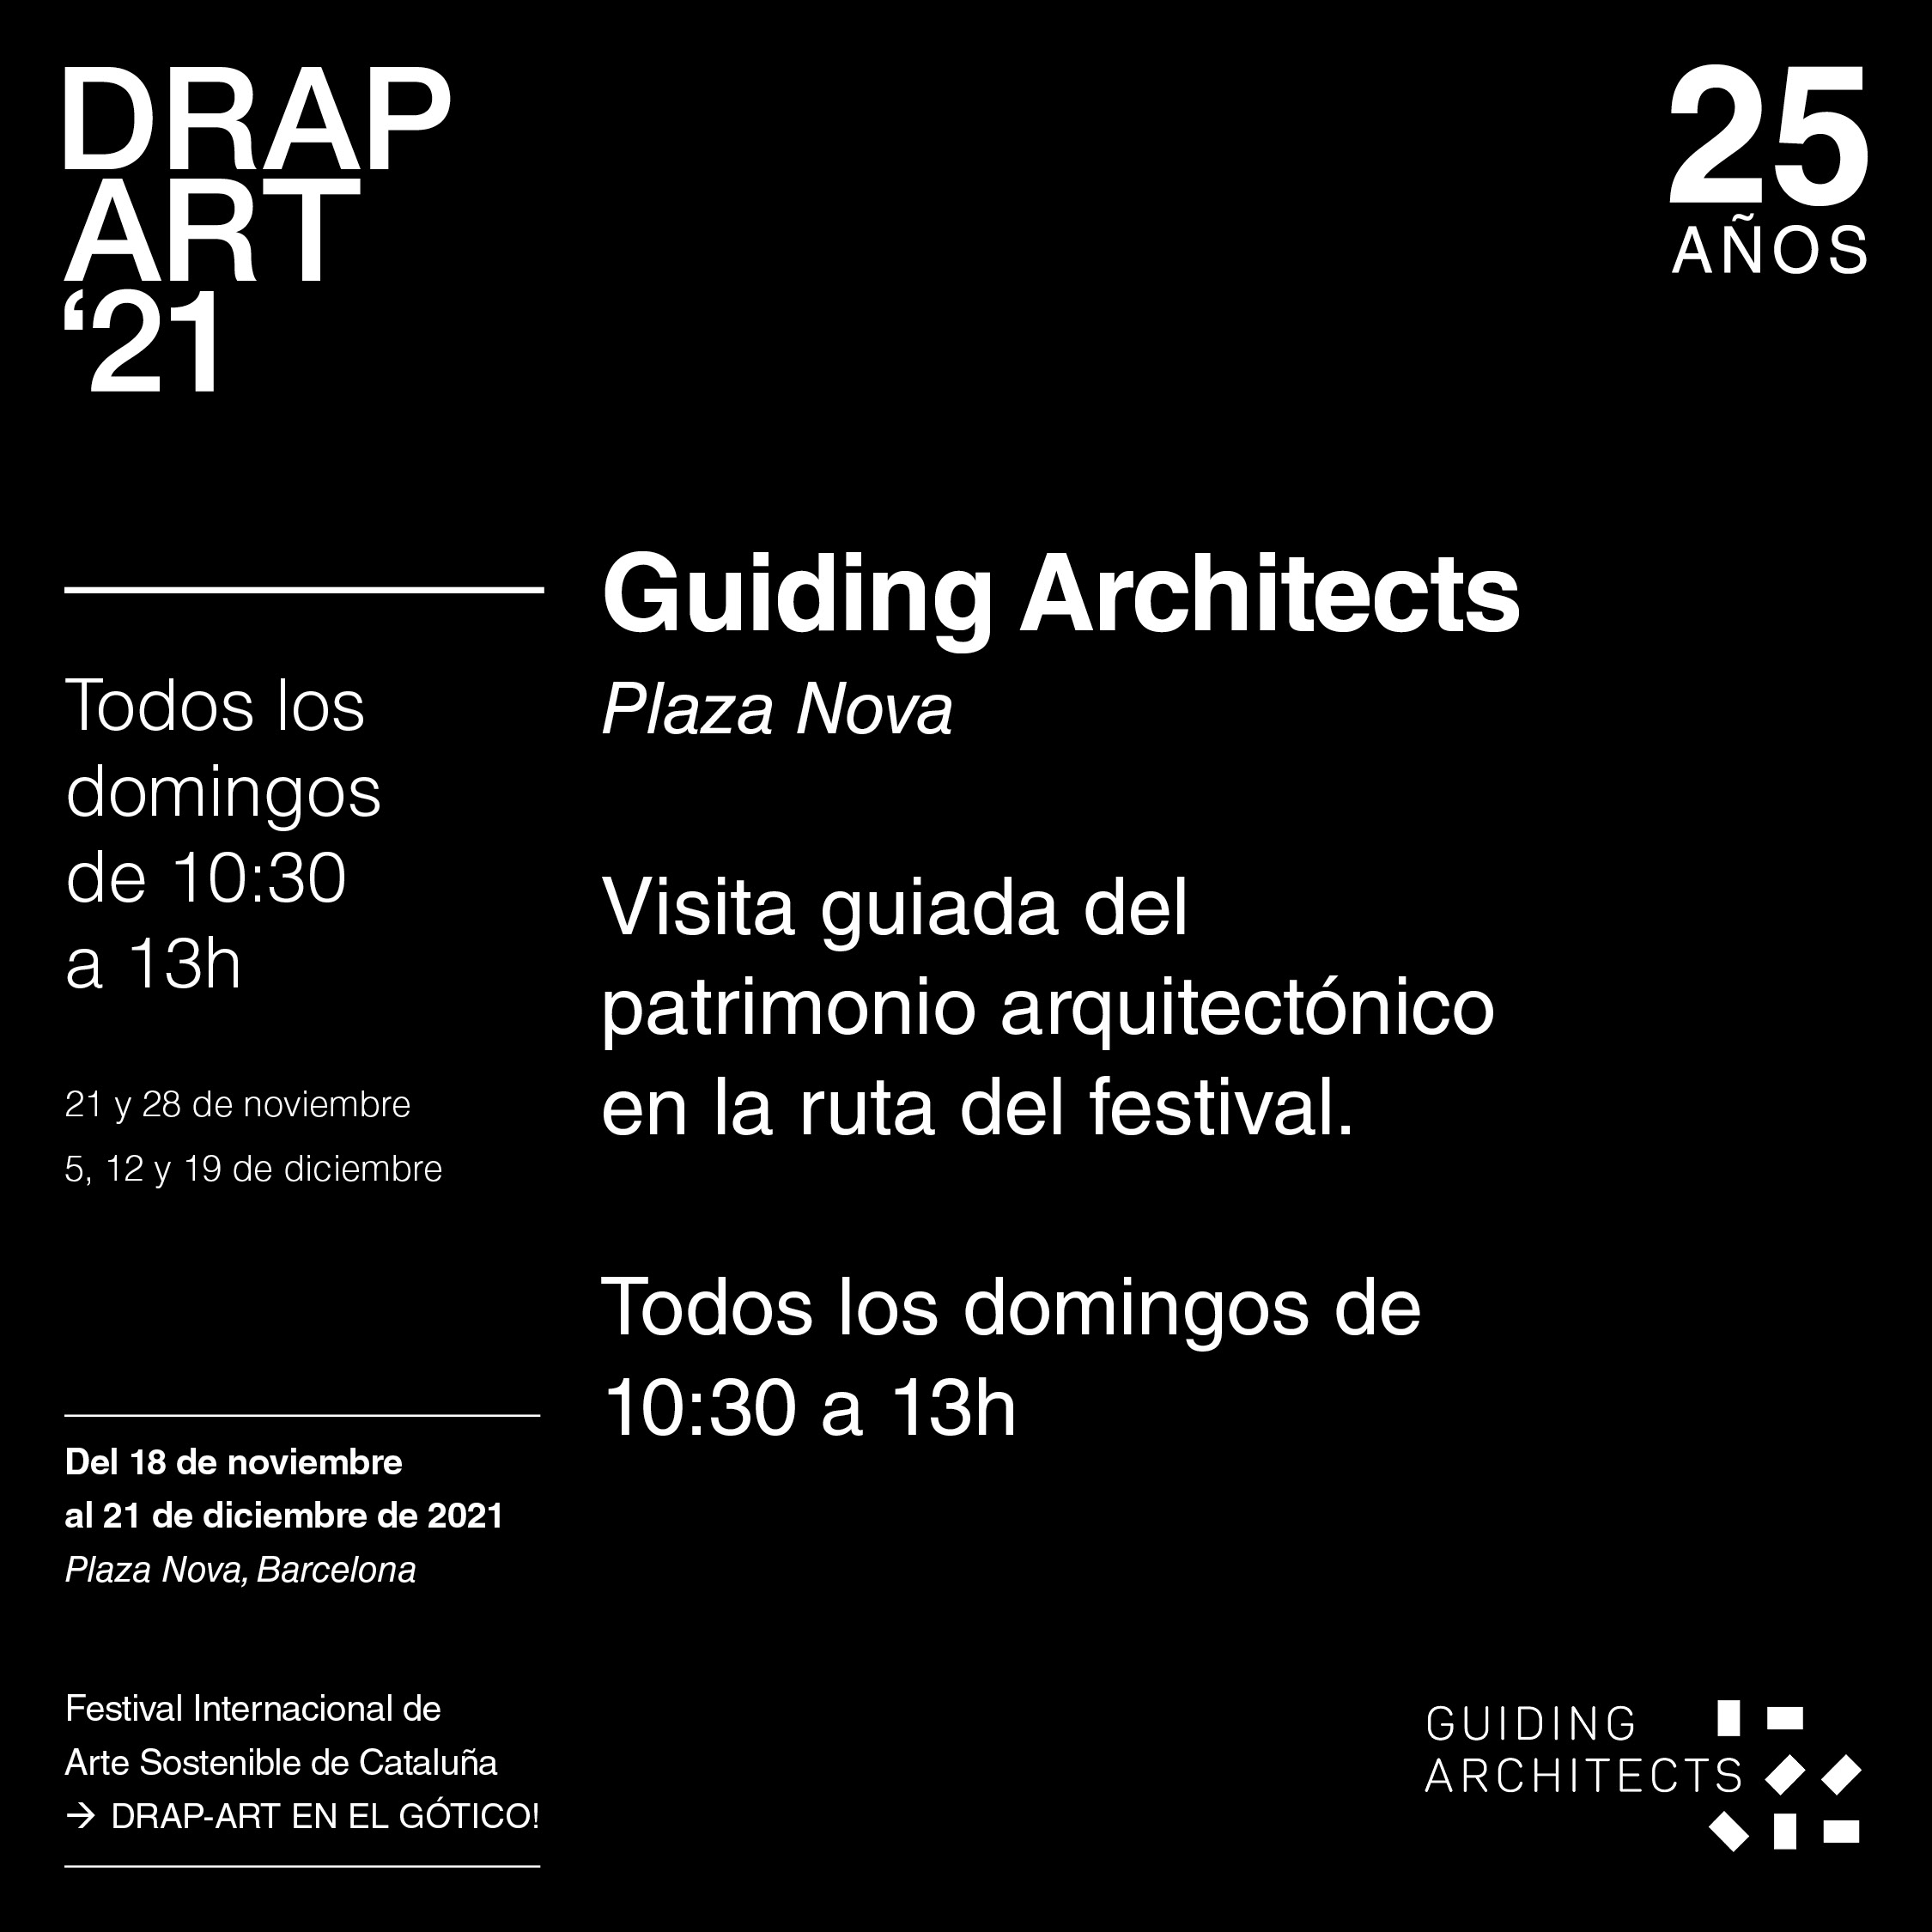 Guiding Architects